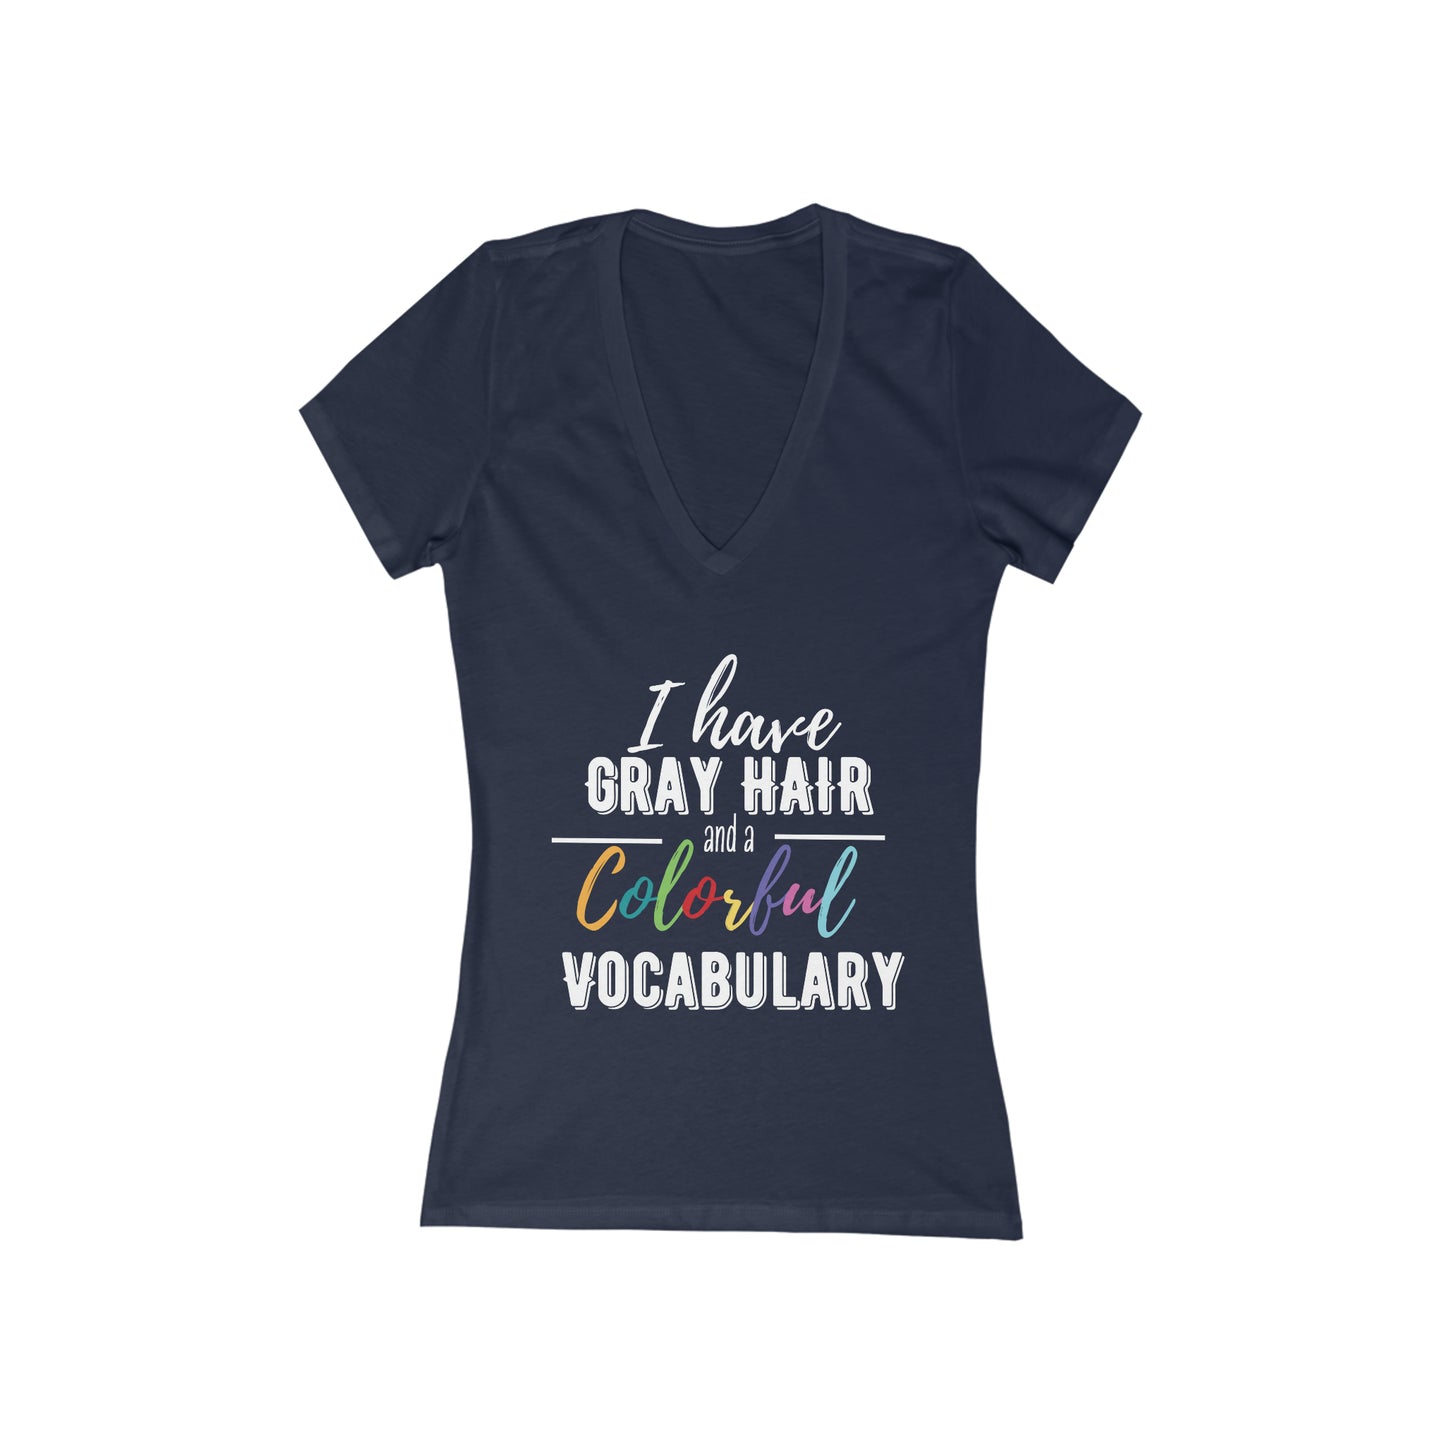 I have gray hair and a colorful vocabulary, short sleeve deep v-neck t-shirt, for women embracing silver and gray hair